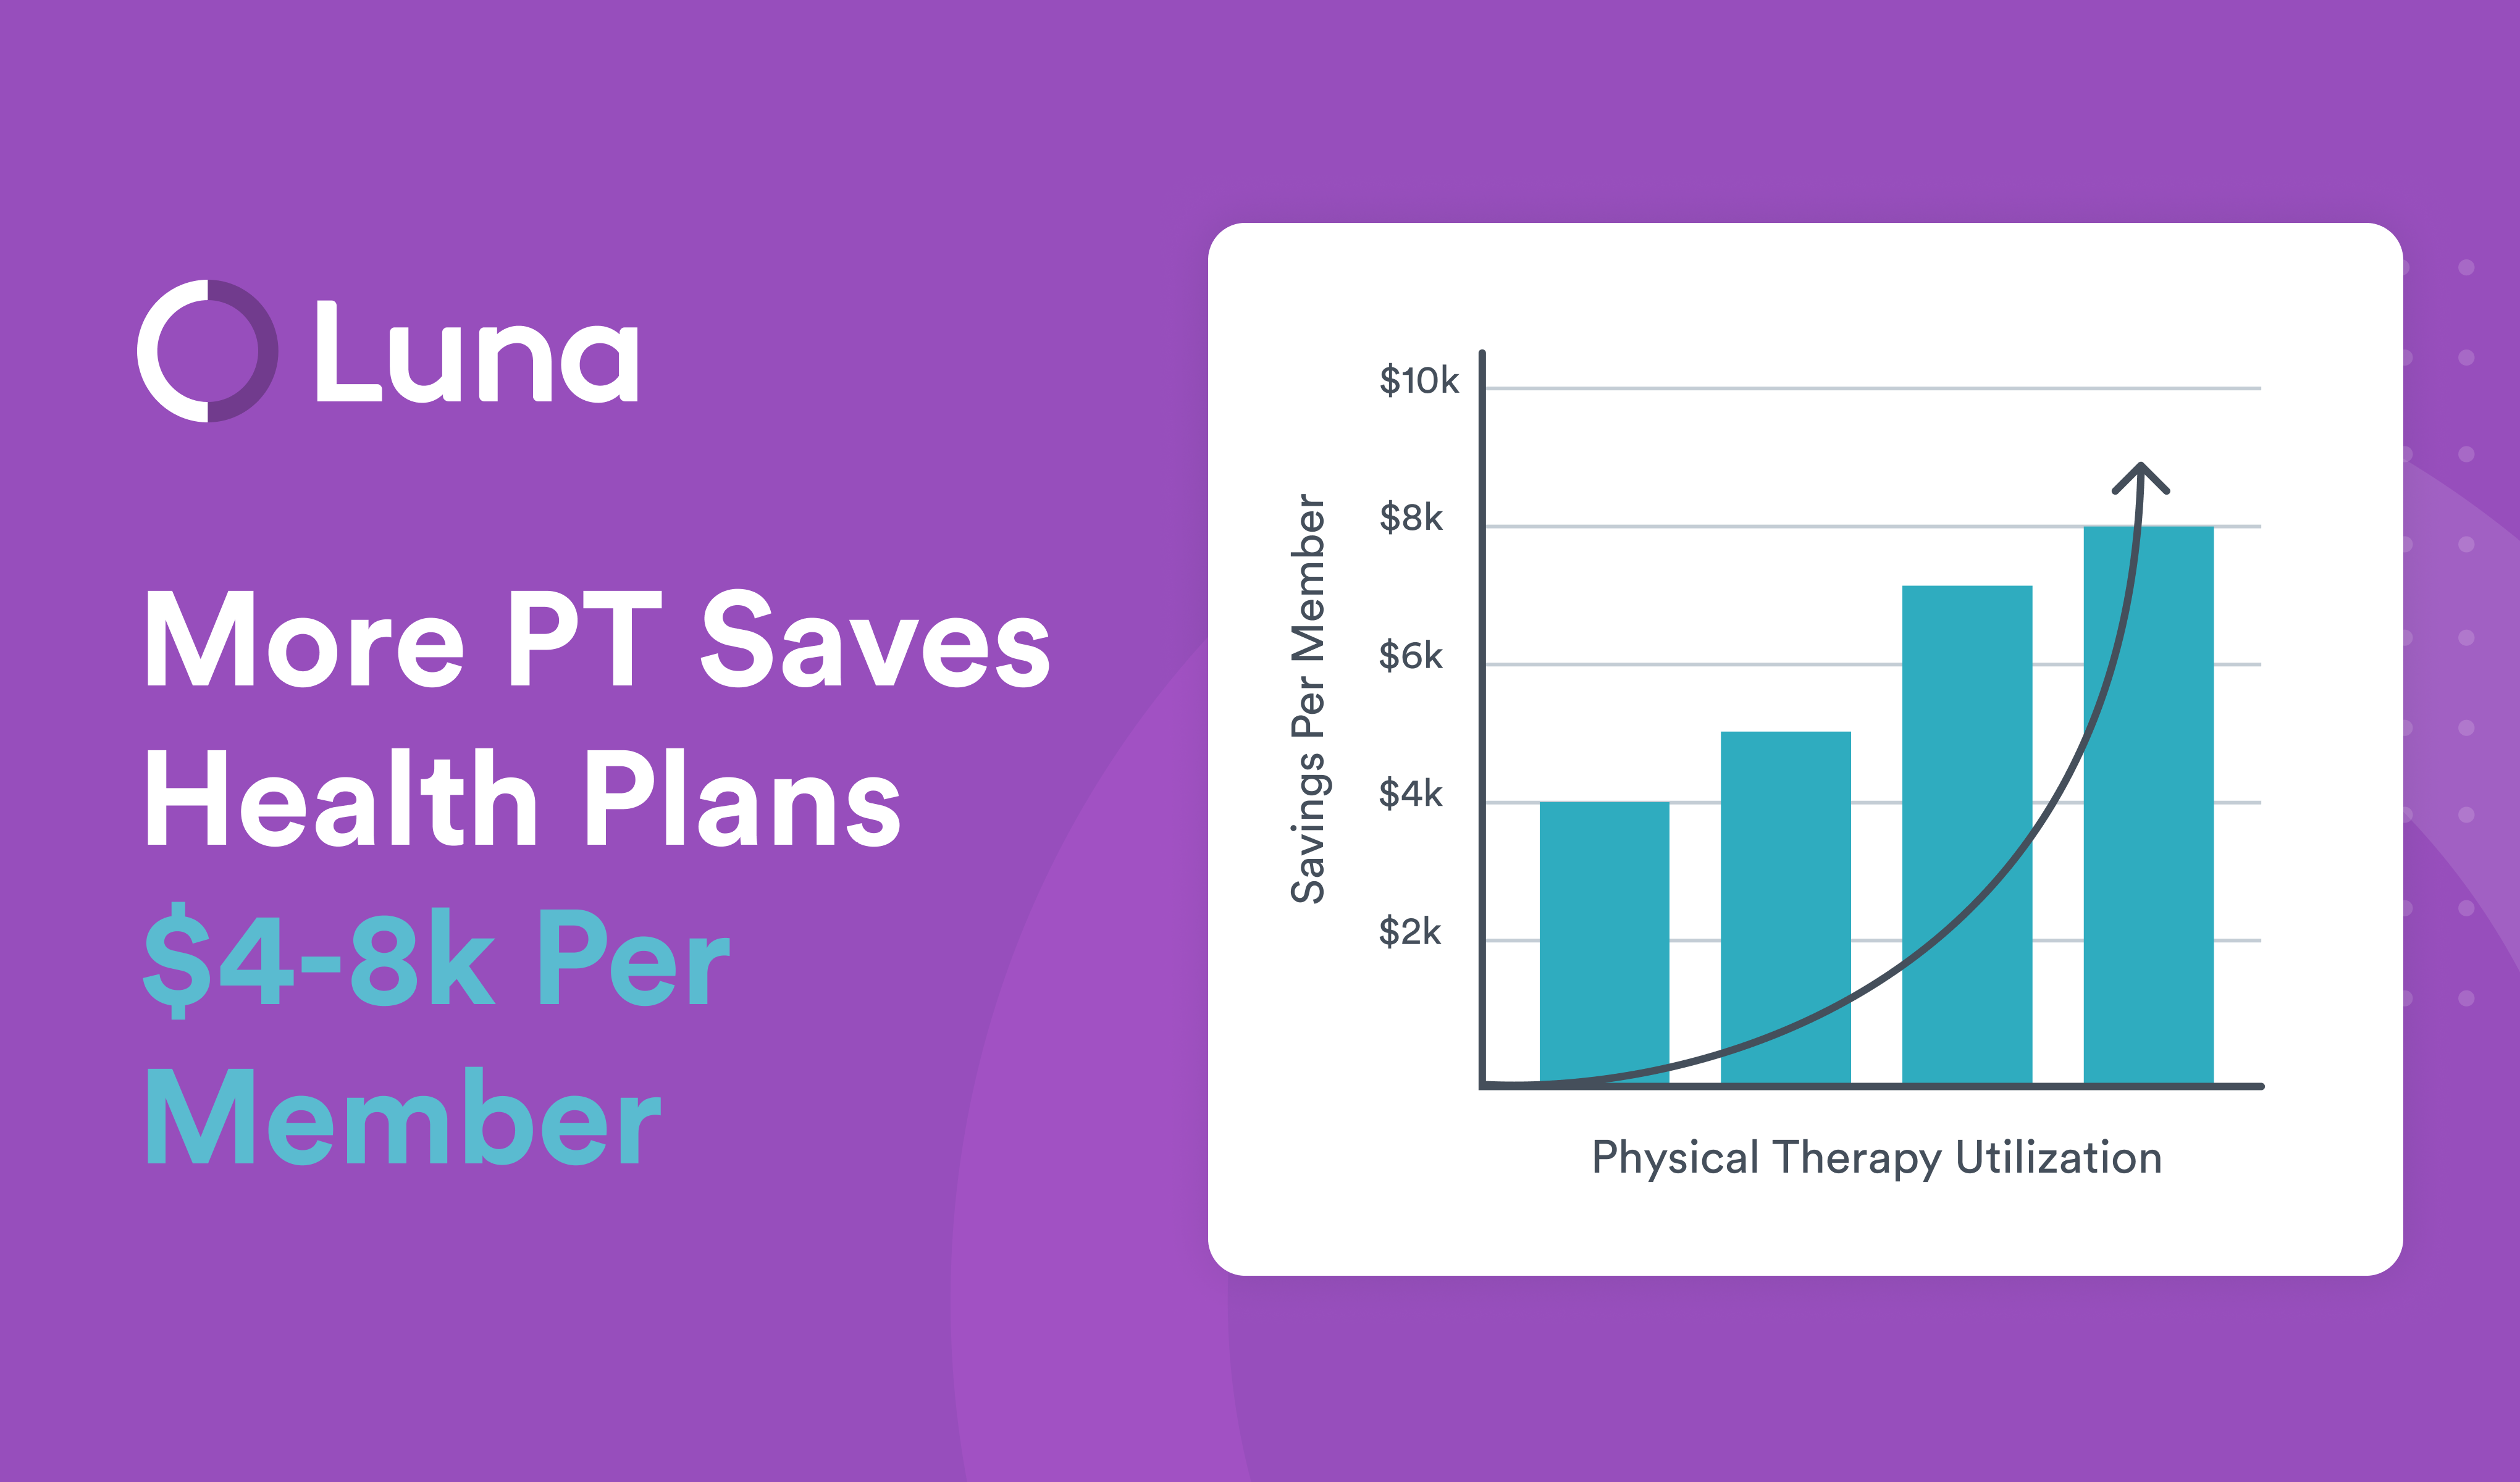 New Medicare Study by Wakely: Health Plans Save Between $4,000 and $8,000 Per Member with Increased Physical Therapy Utilization